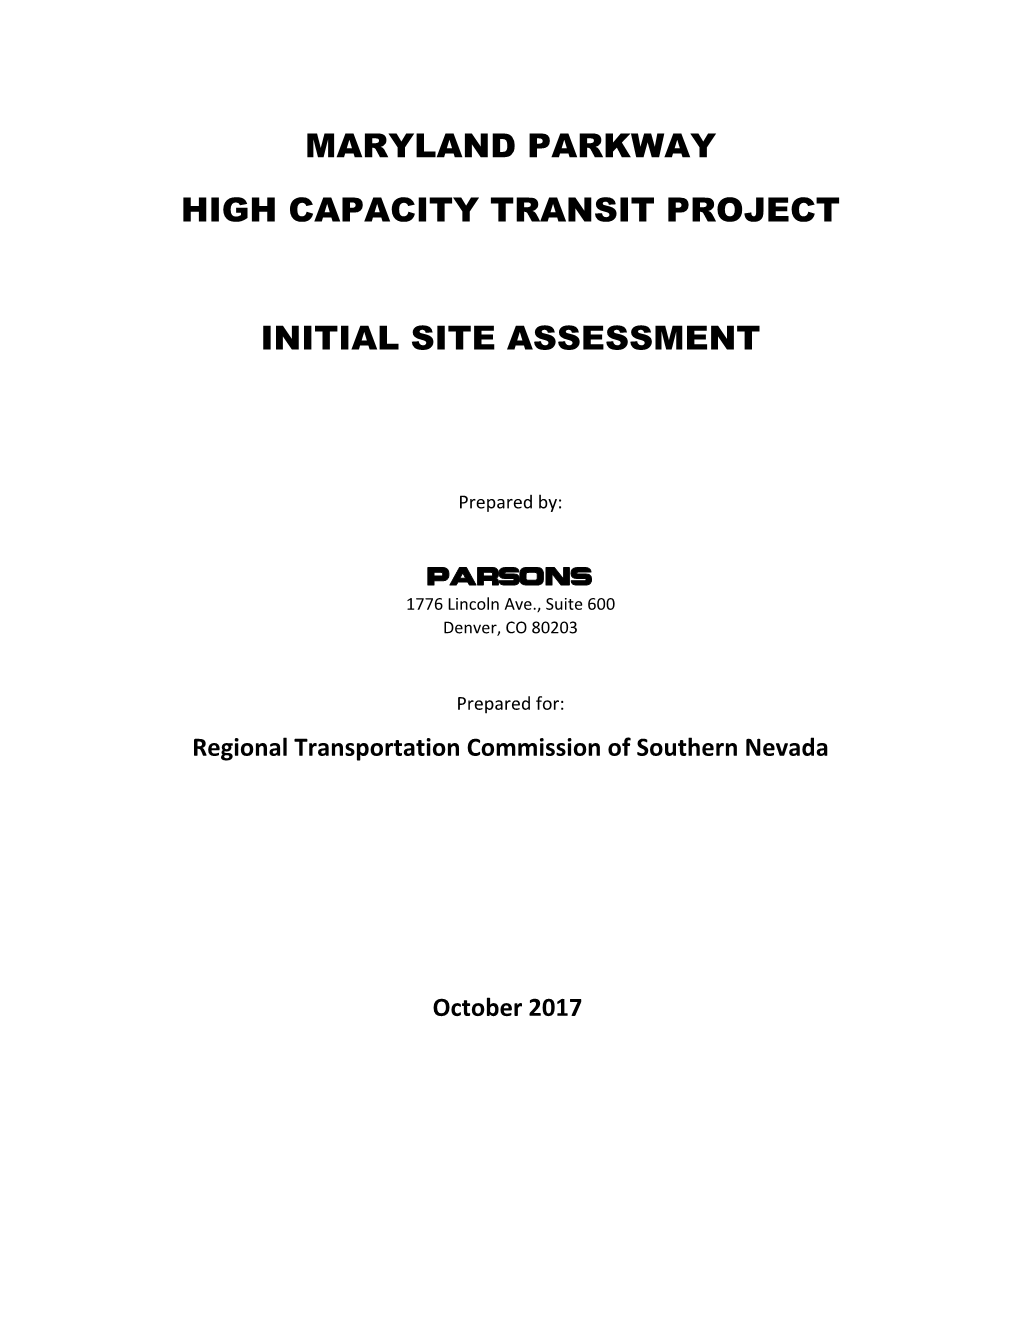 Maryland Parkway High Capacity Transit Project